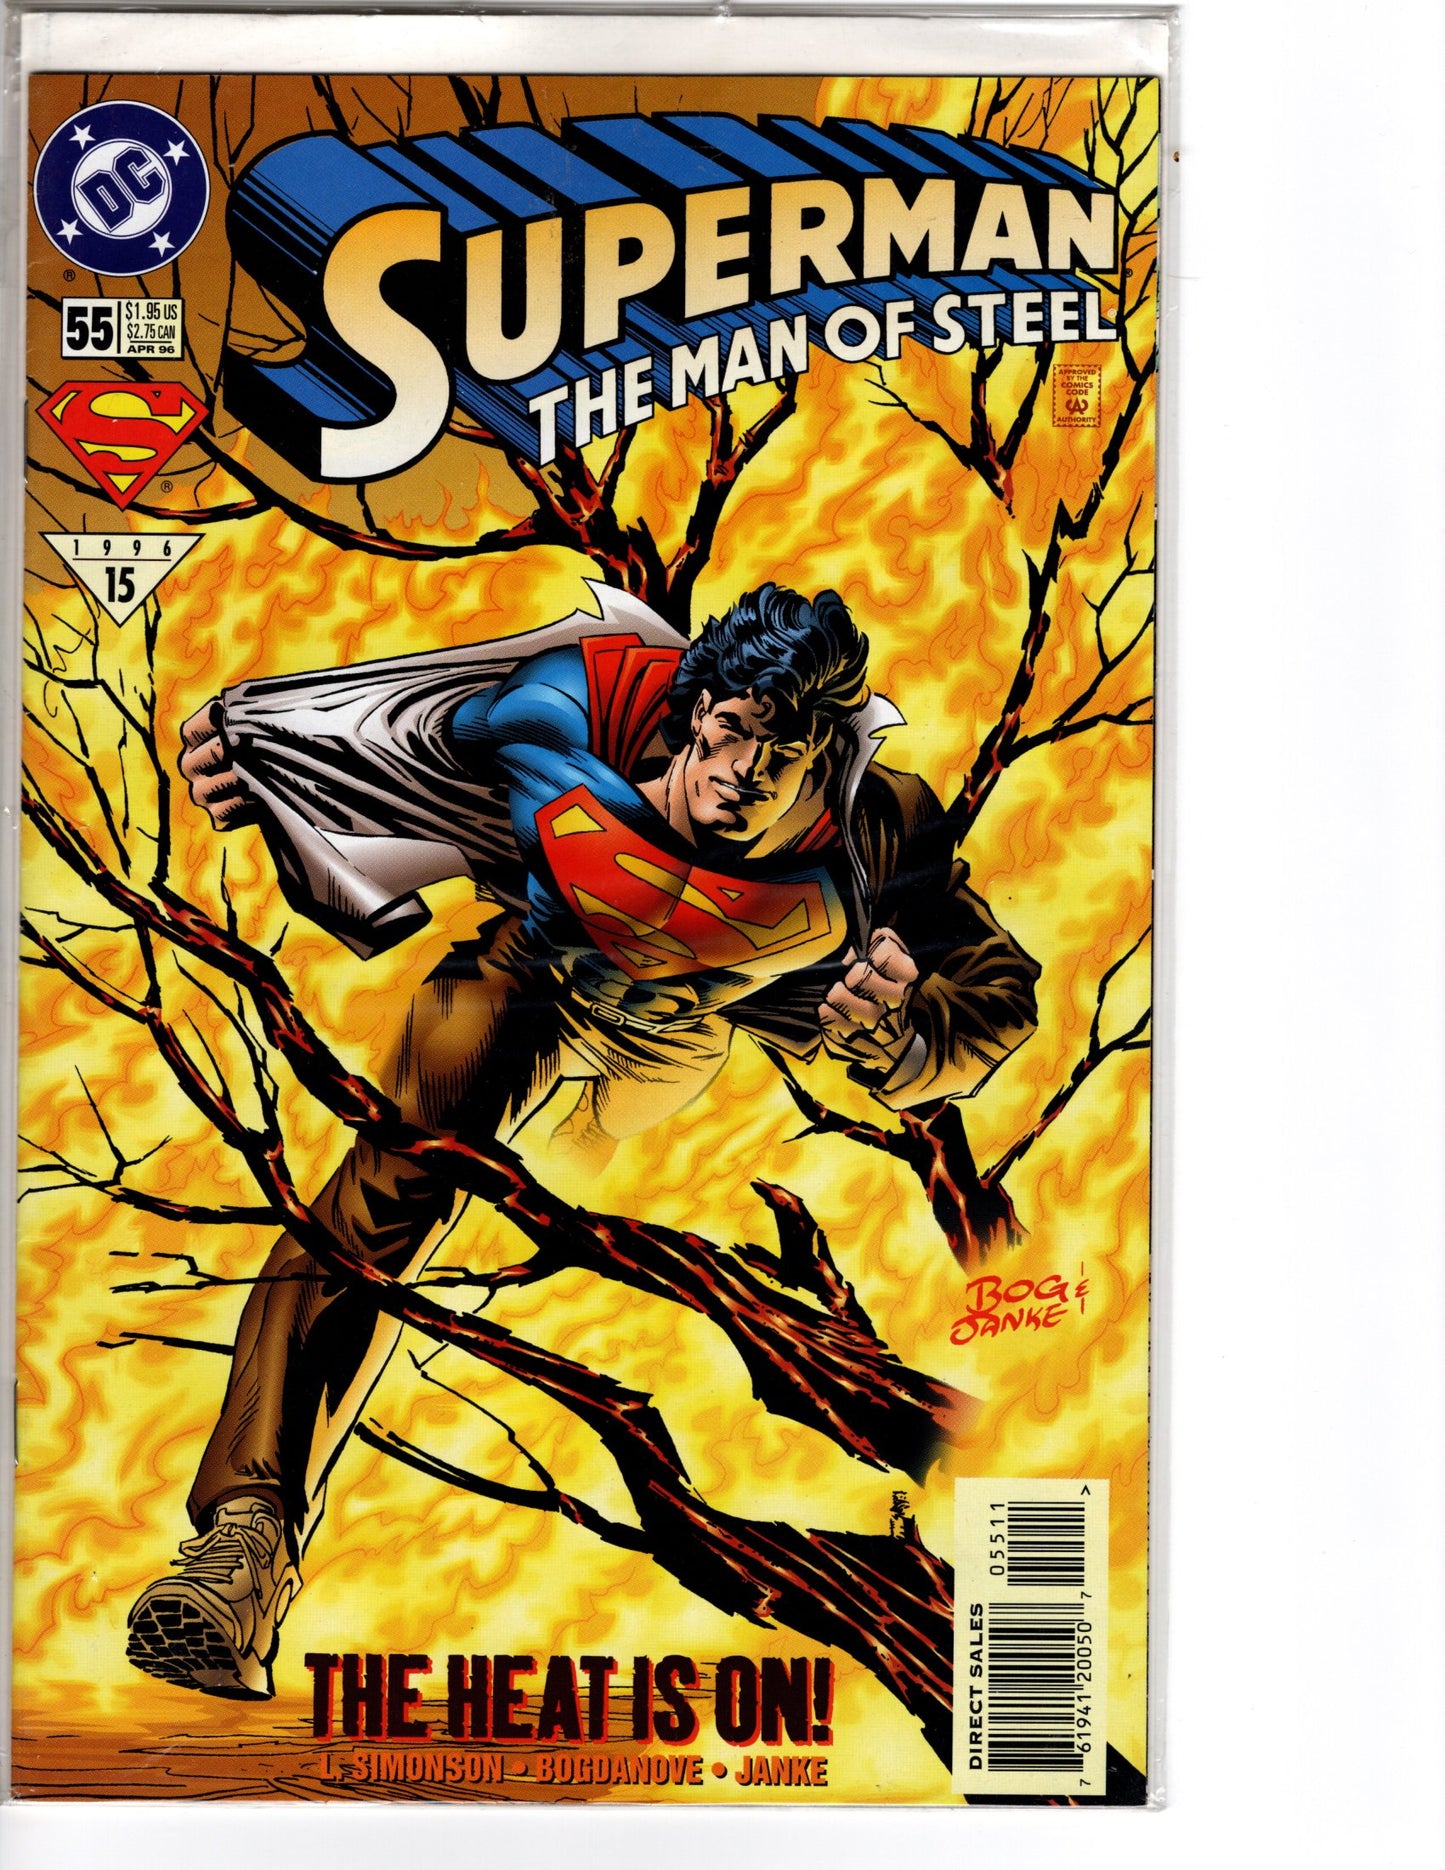 Superman - The Man of Steel No. 55